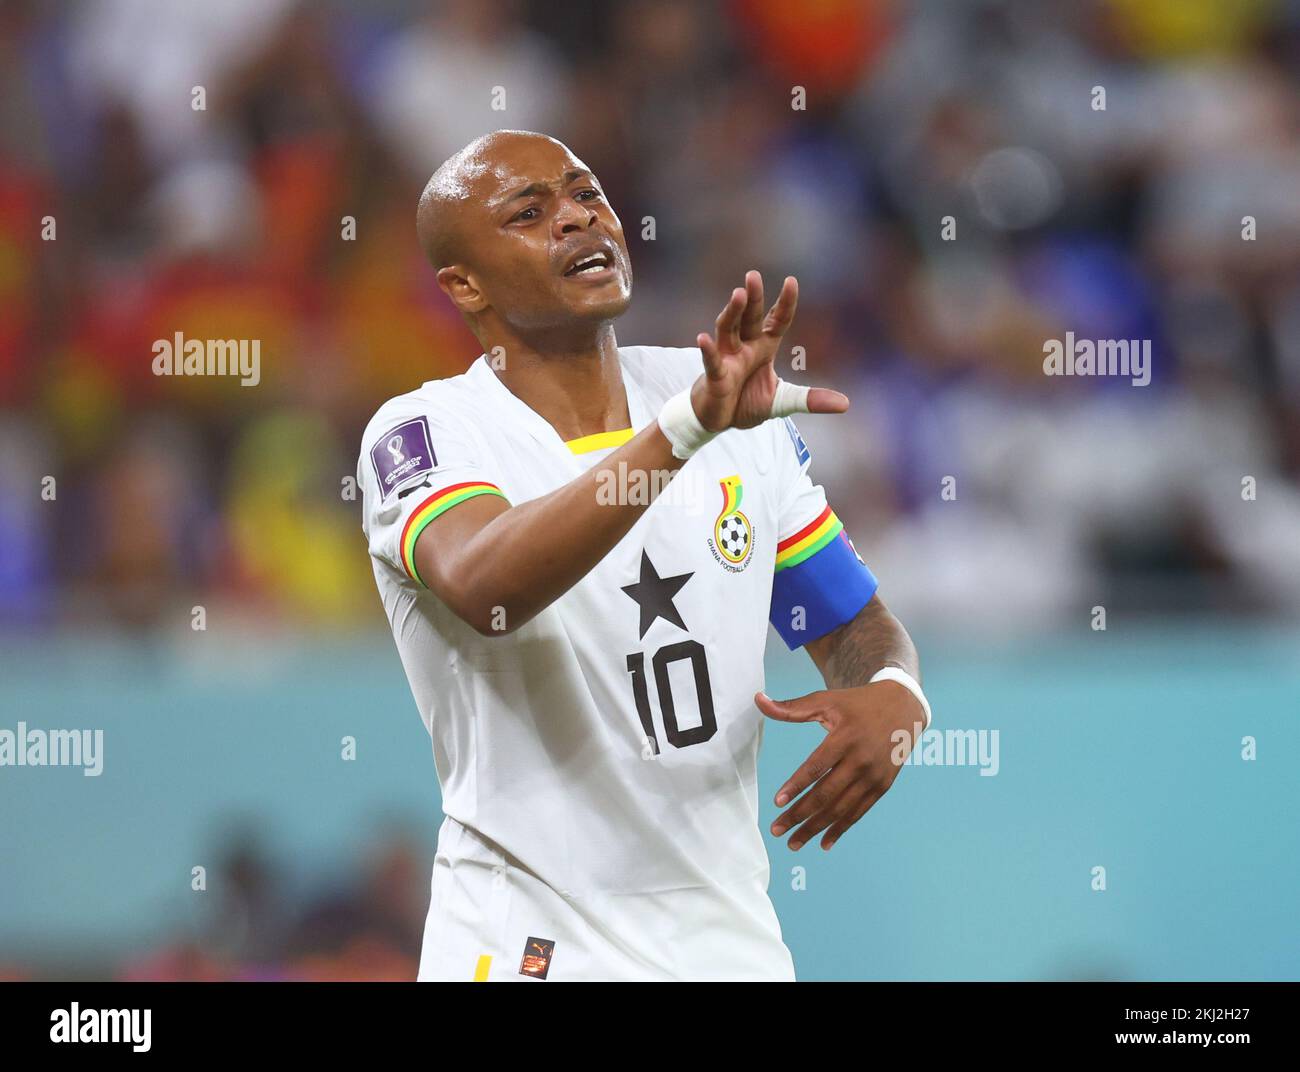 Doha, Qatar. 24th Nov, 2022. Soccer: World Cup, Portugal - Ghana, preliminary round, Group H, Matchday 1, Stadium 974, André Ayew of Ghana apologizes. Credit: Tom Weller/dpa/Alamy Live News Stock Photo